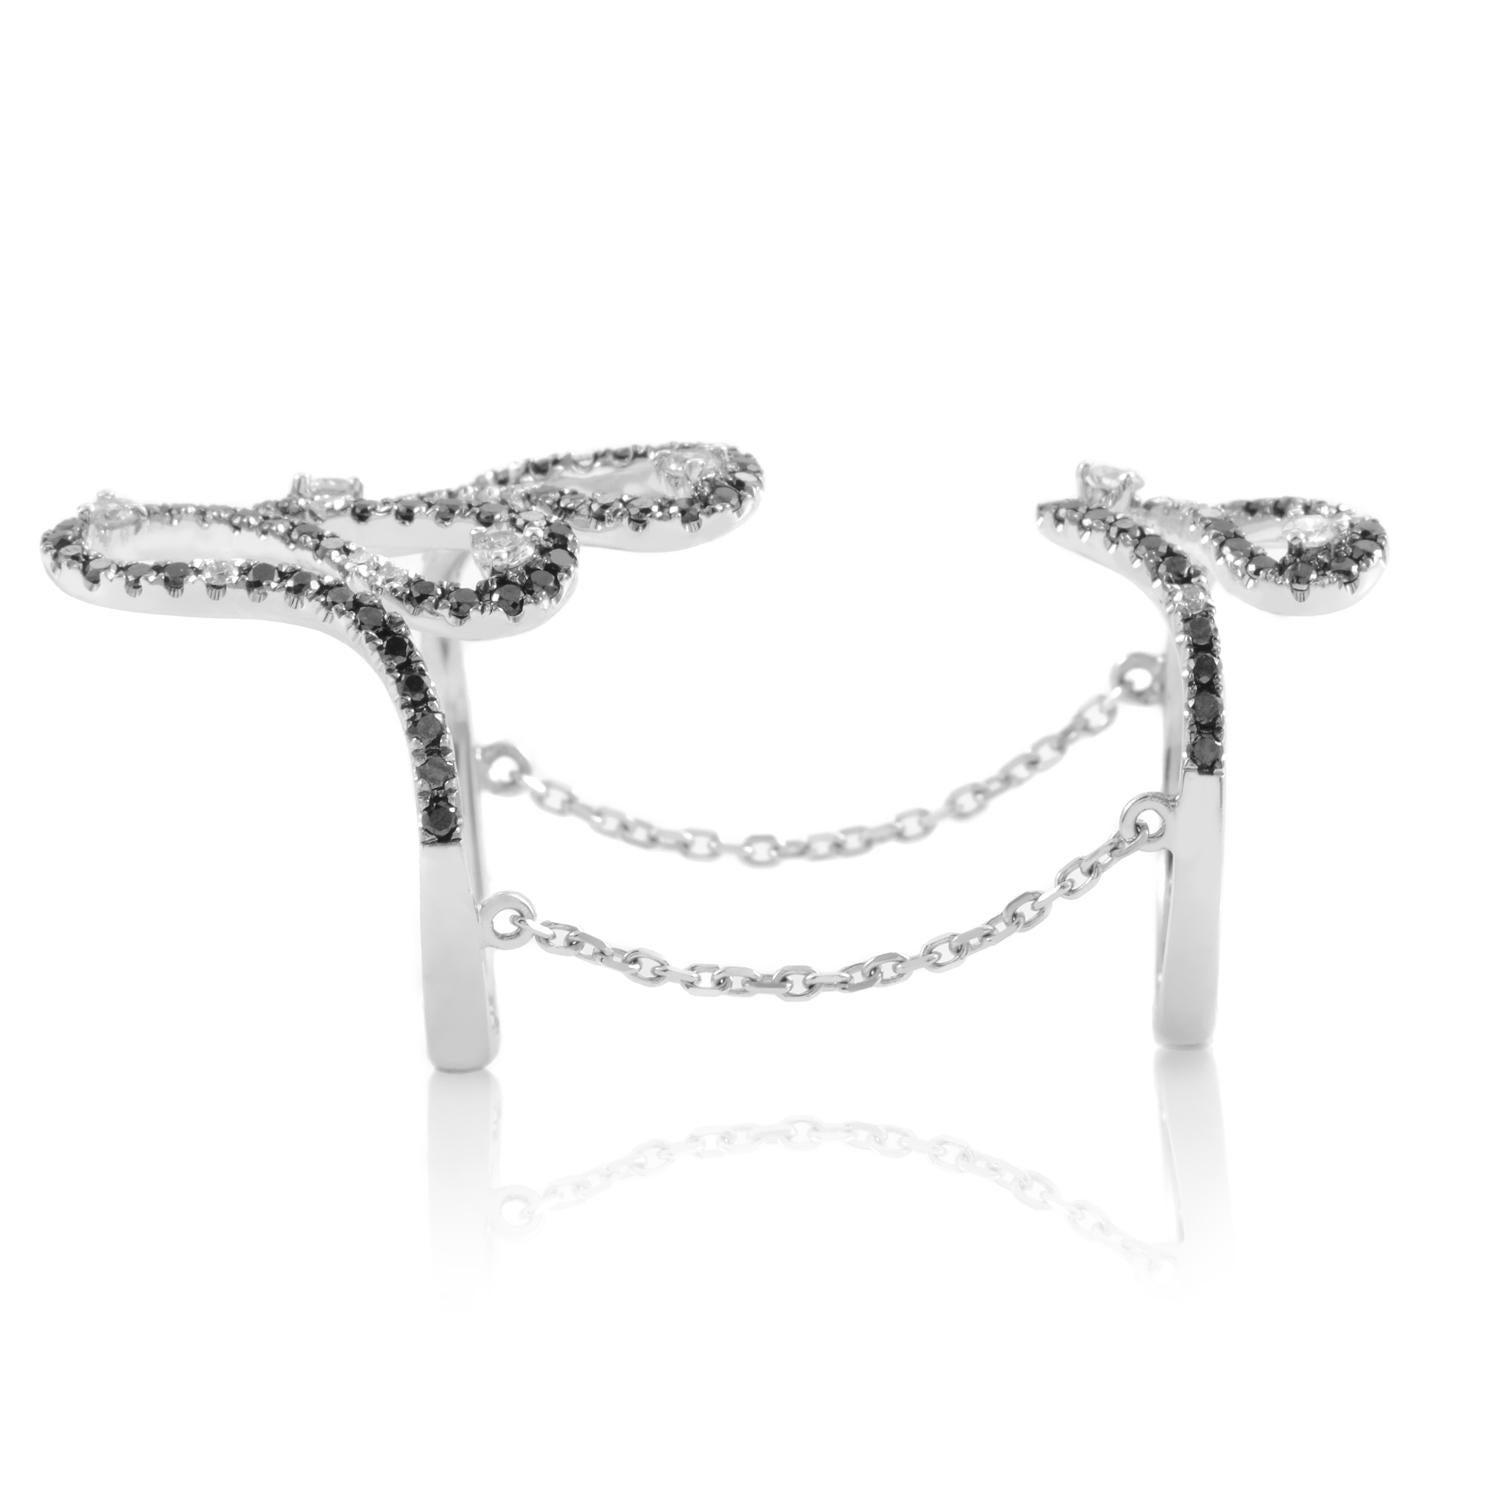 This alluring piece of jewelry is a very uniquely designed, contemporary ring. It consists of two separate rings linked together by an 18K white gold chain. The crowns of the two rings are sensationally set with black and white diamonds.

